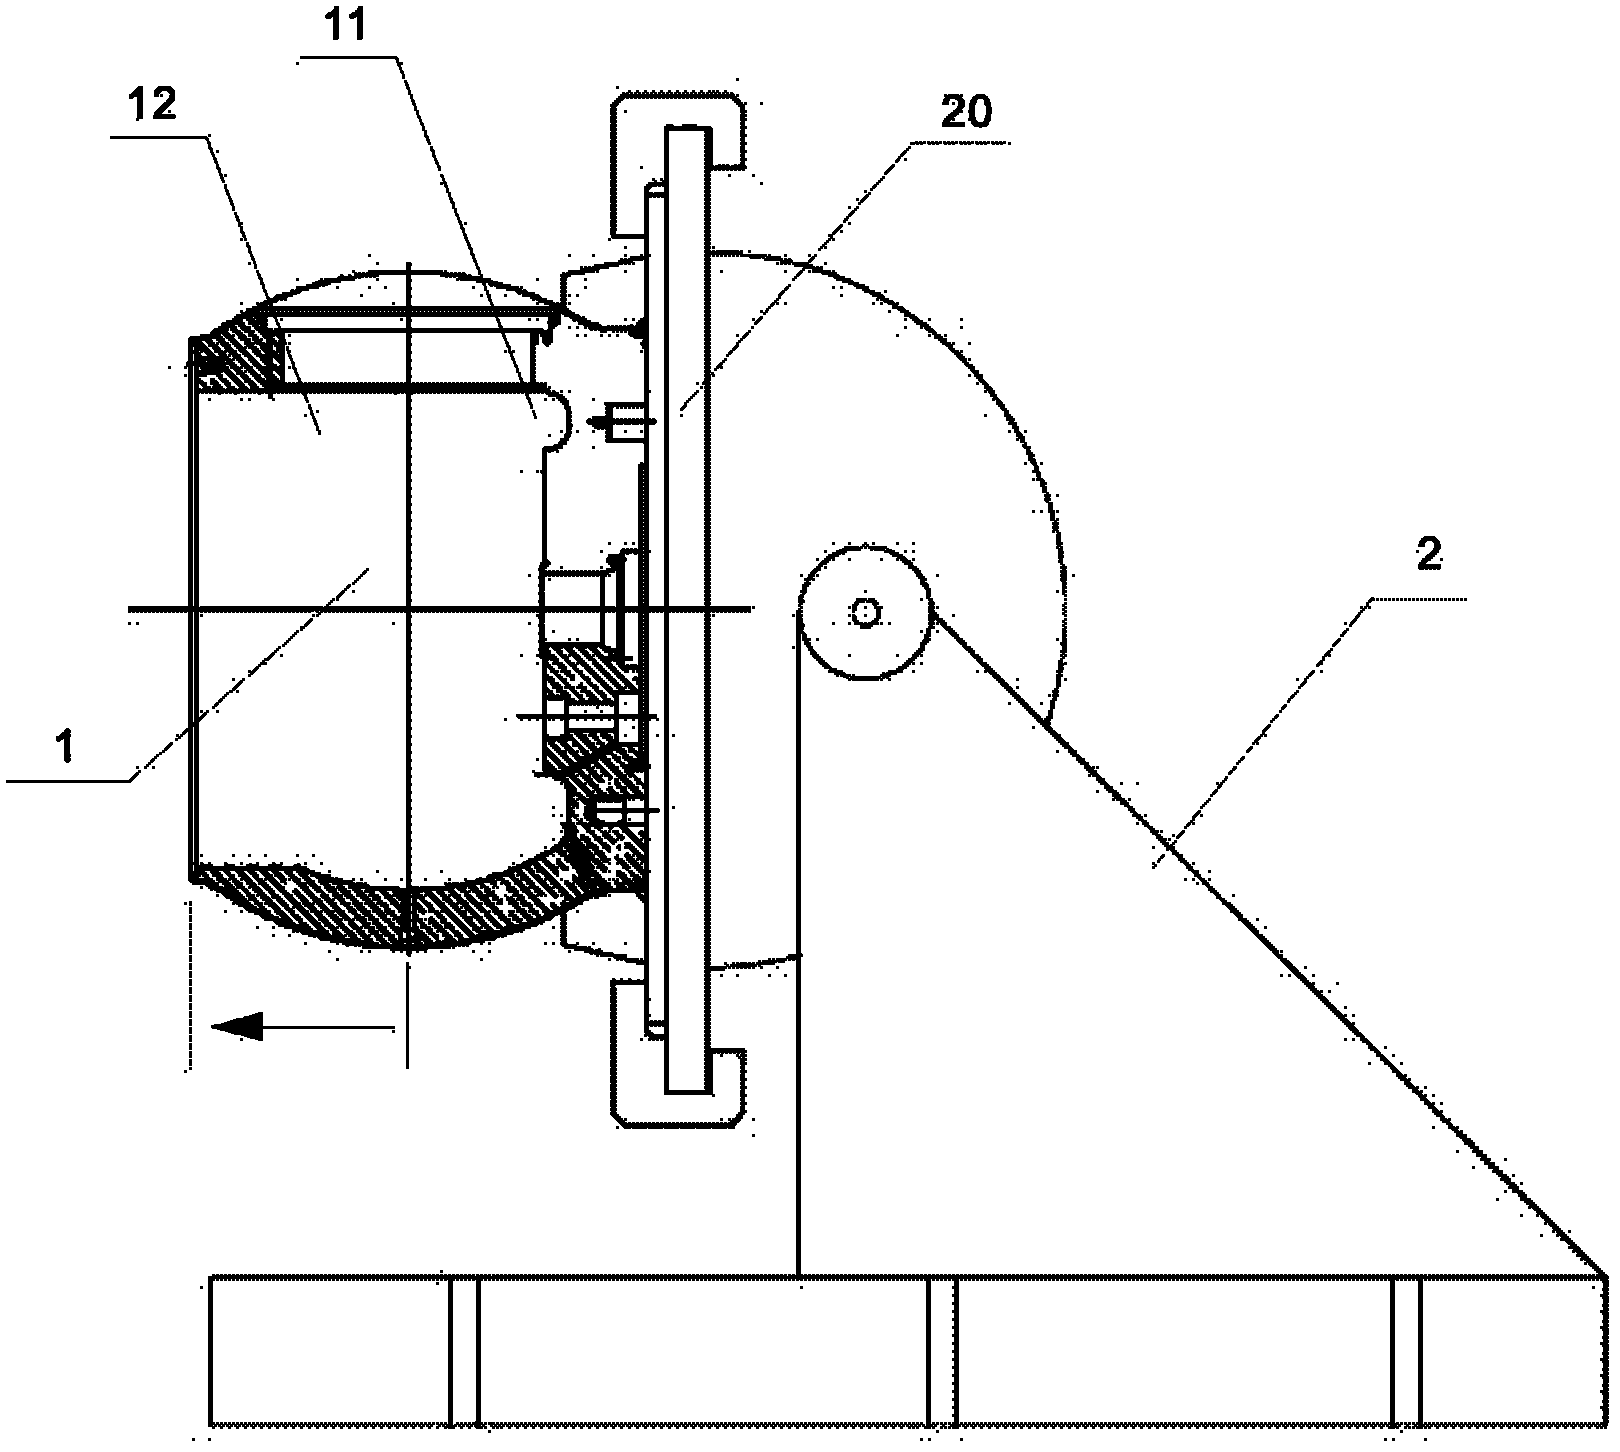 Method for cladding wear-resisting layer on surface of runner hub of hydraulic turbine